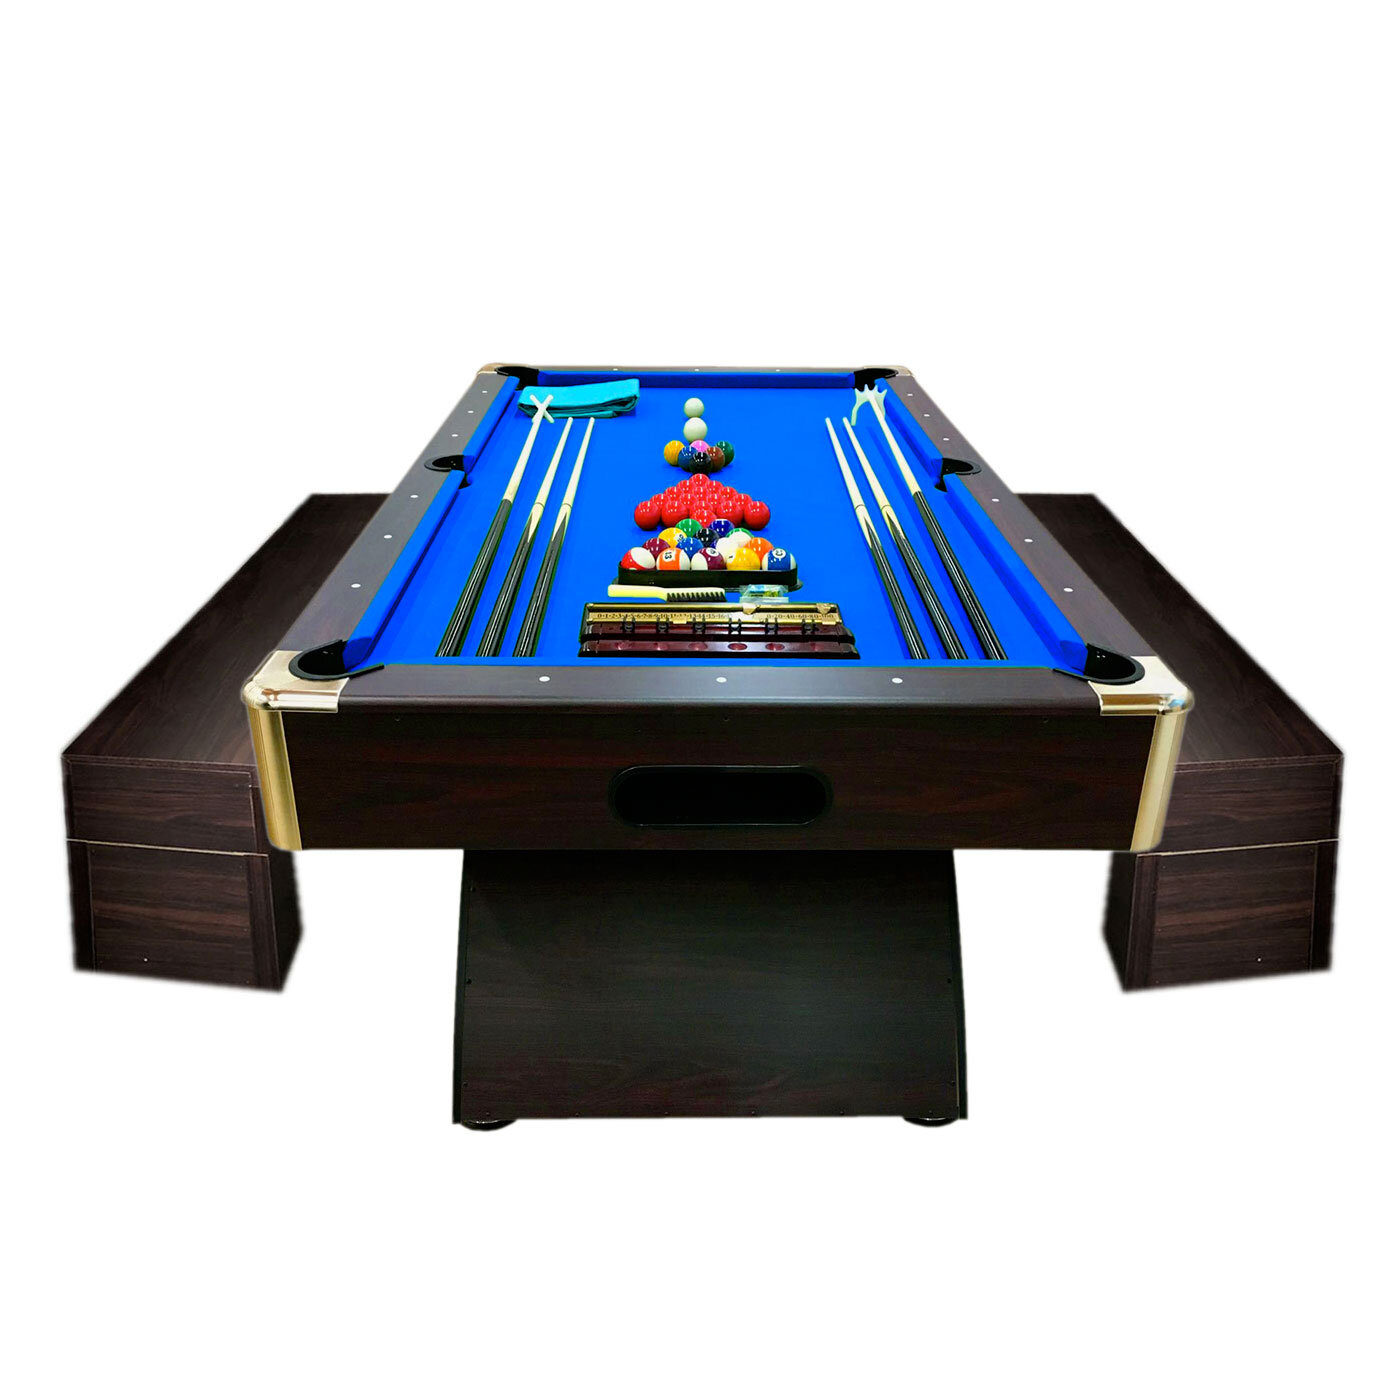 American Style 8 Ball Pool Table For Sale - Buy 8 Ball Pool Table For  Sale,8 Ball Pool Table For Sale,8 Ball Pool Table For Sale Product on